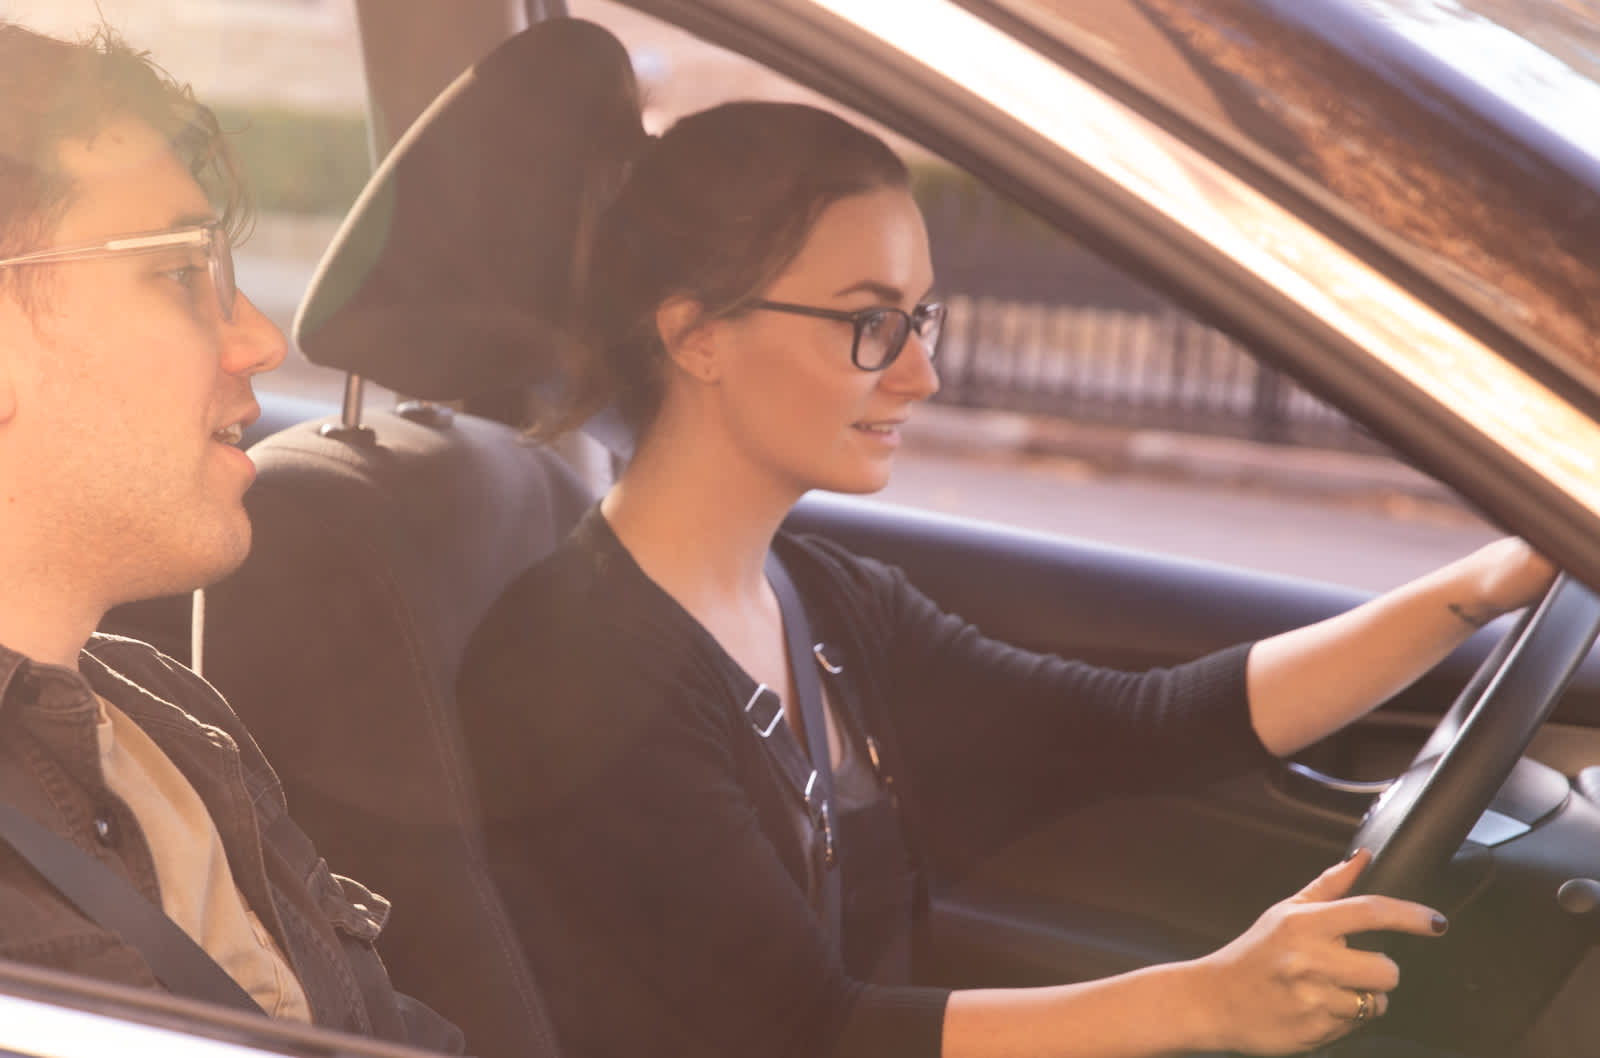 Woman with glasses has both hands on the wheel